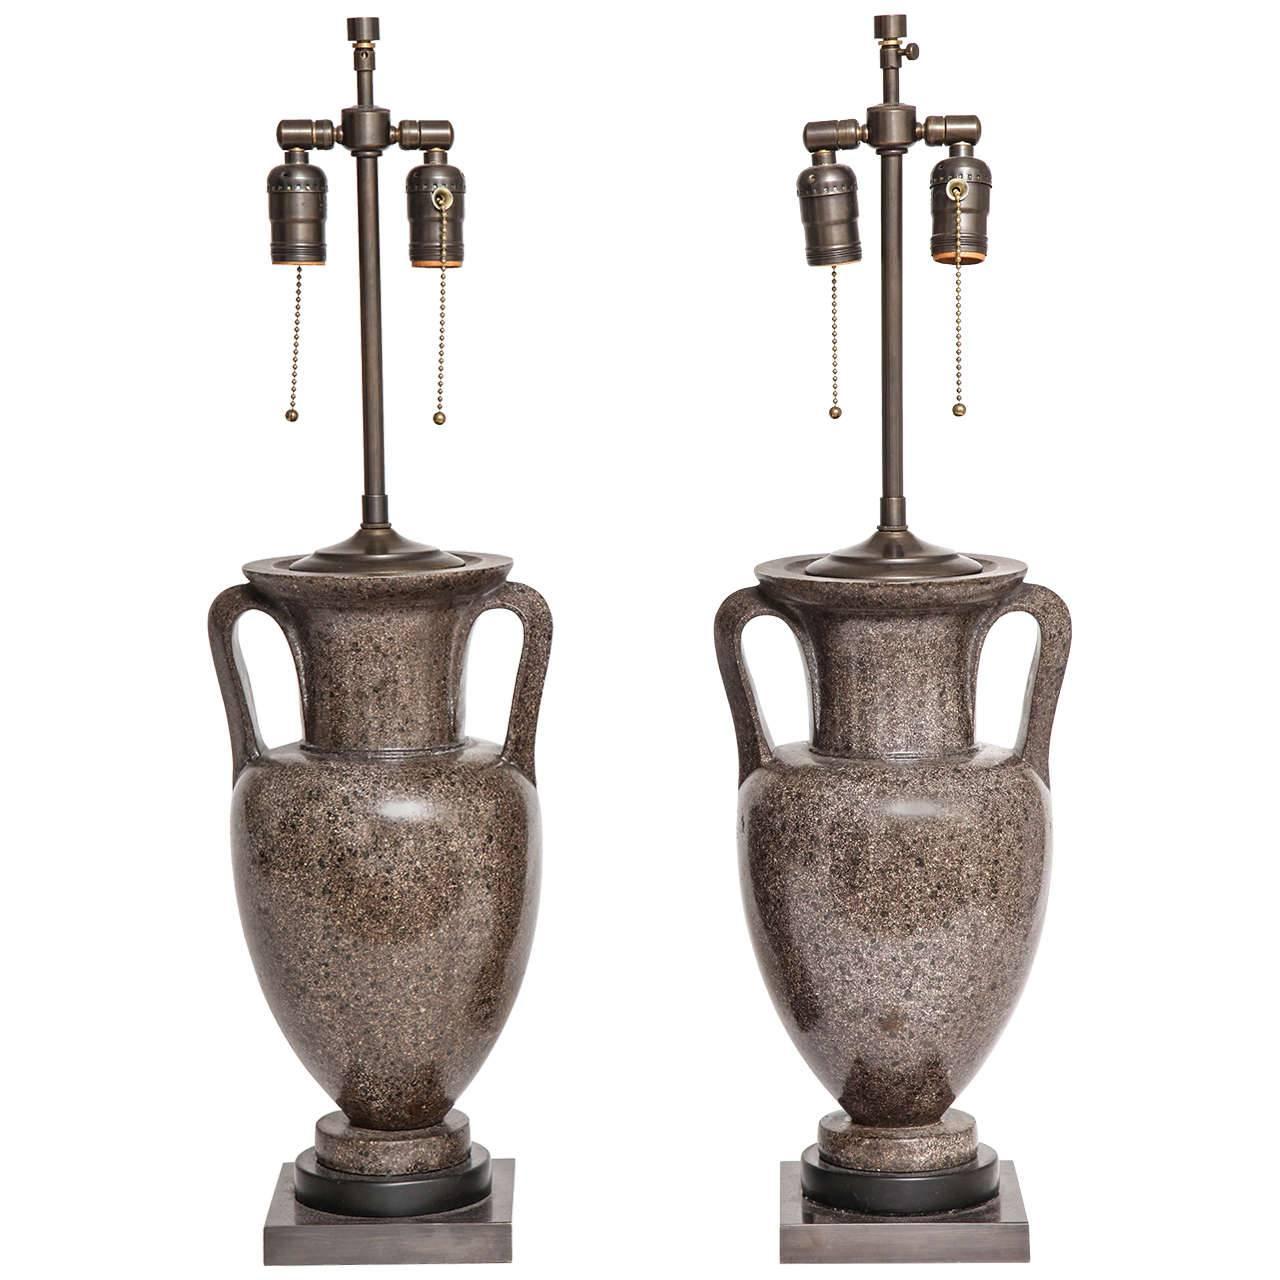 Pair of Italian Grand Tour Porphyry Urns Converted into Lamps, Early 1800s For Sale